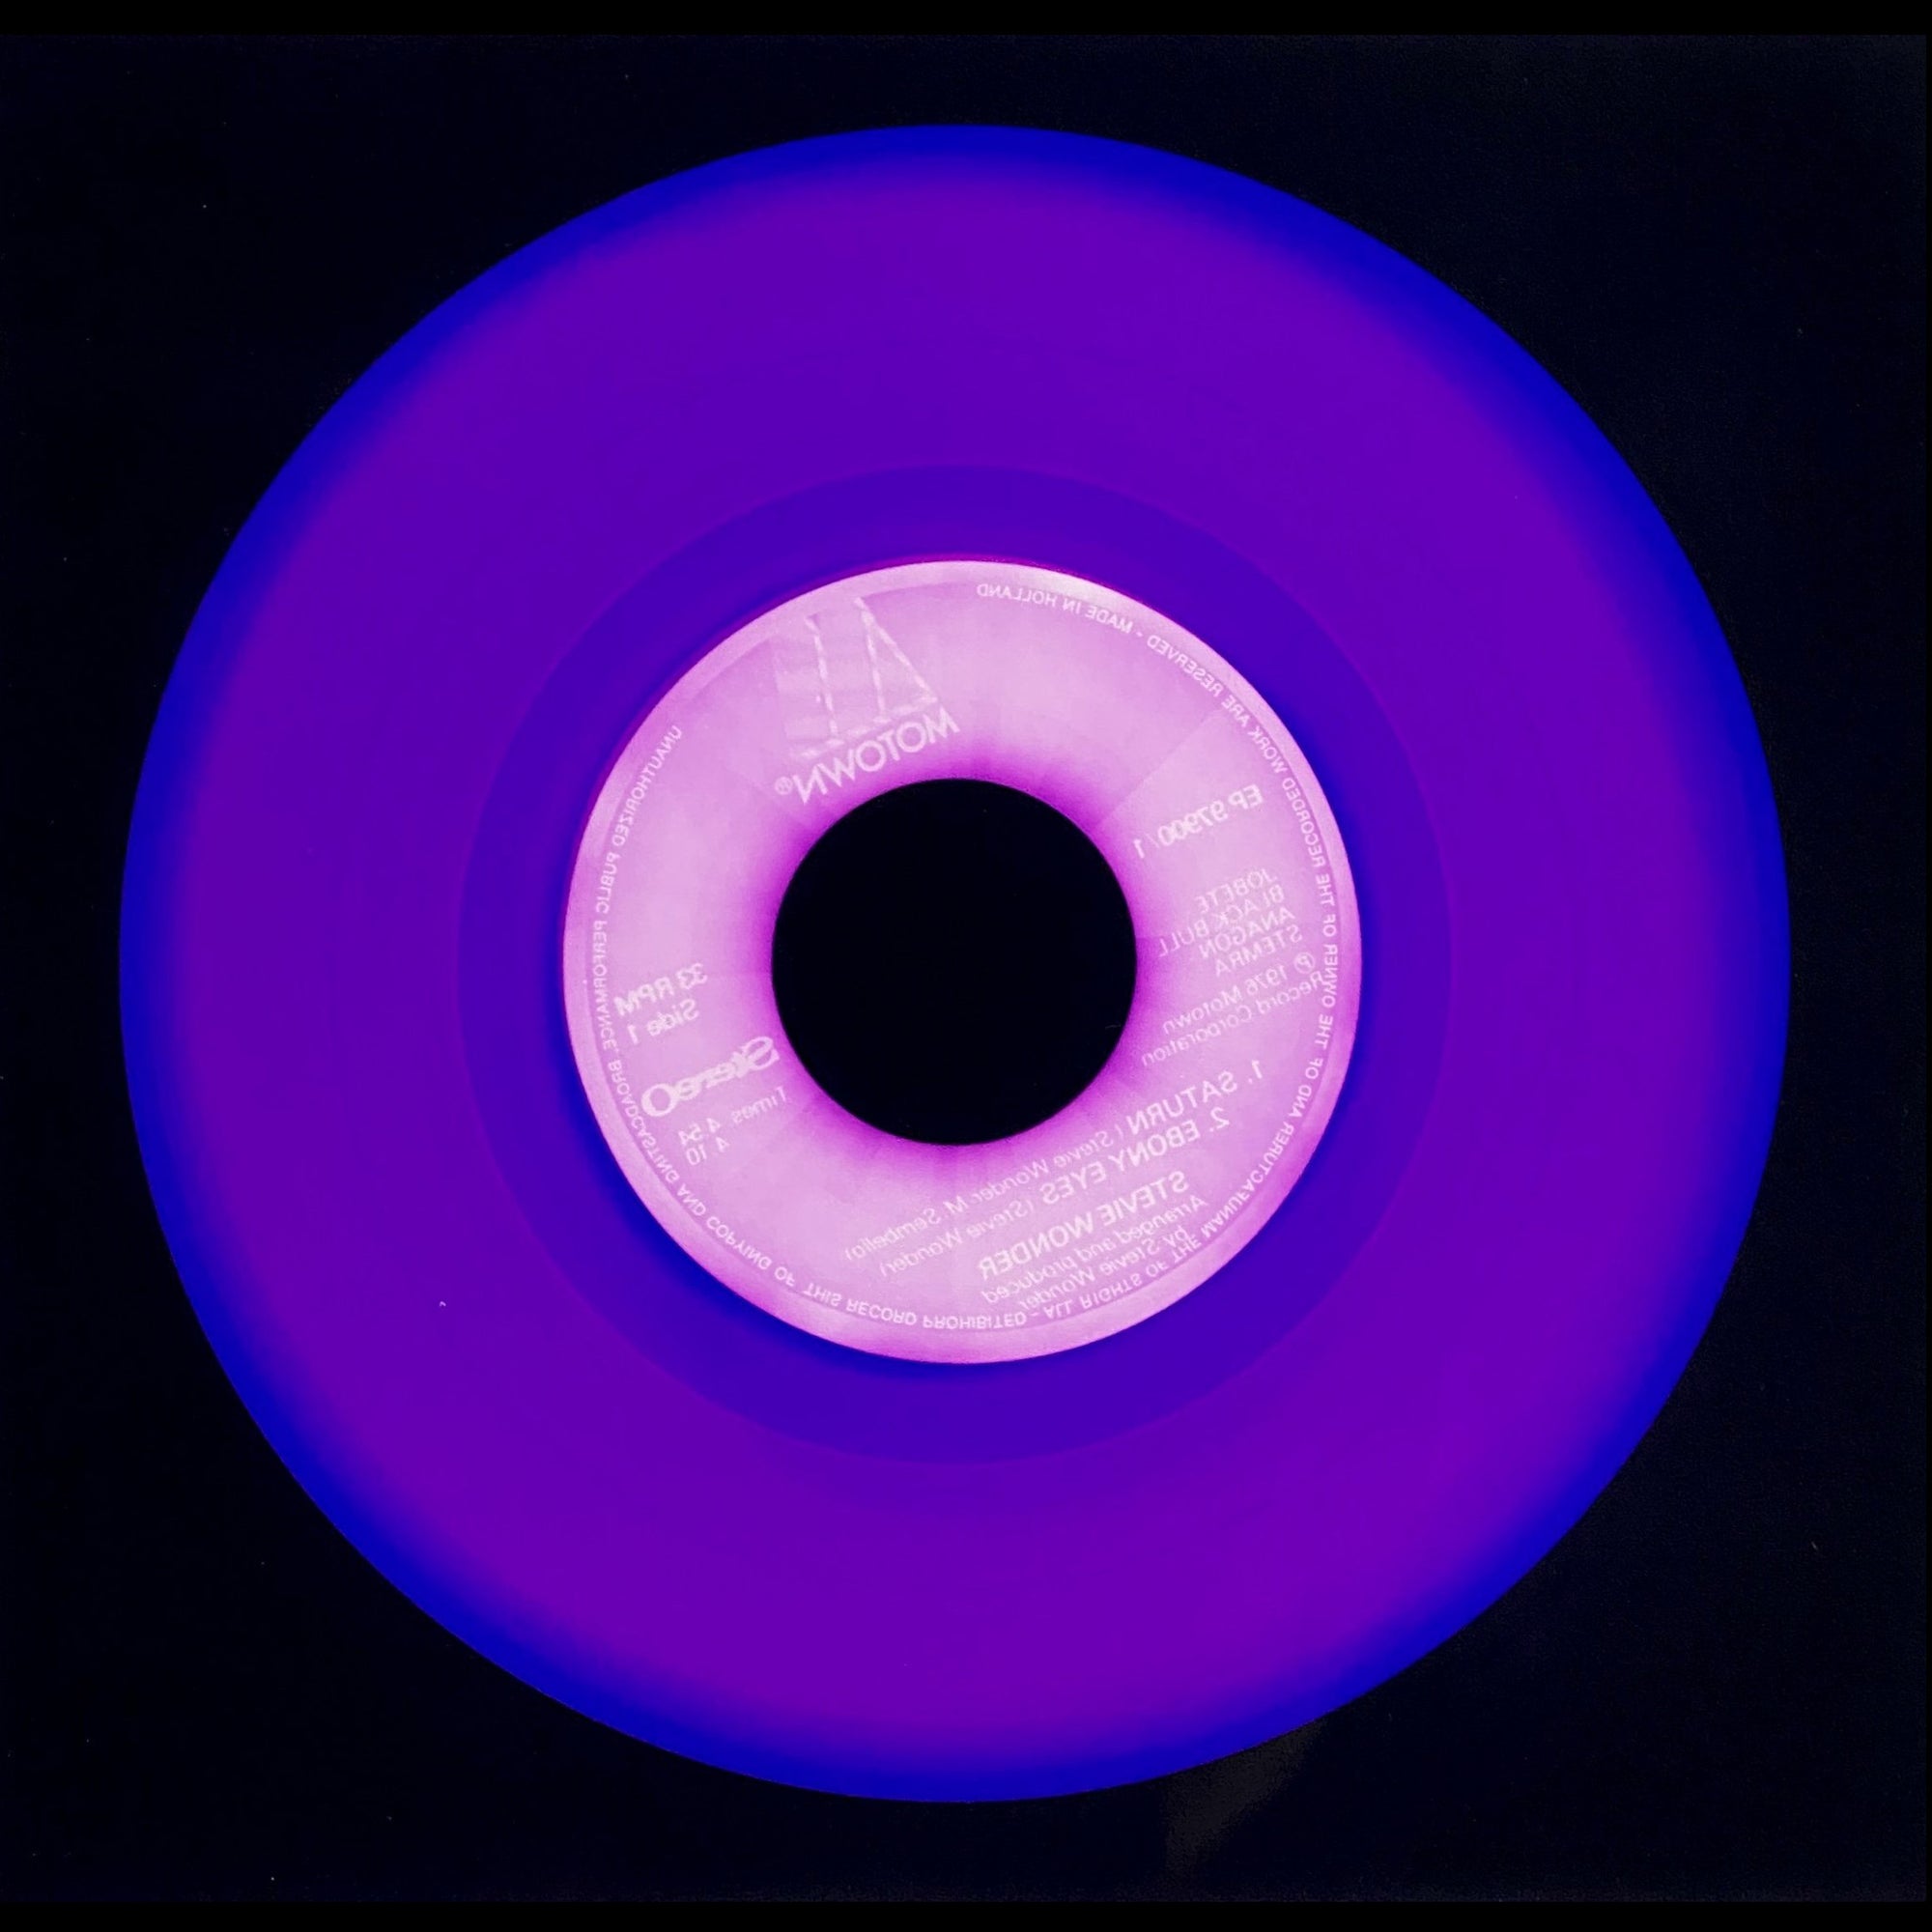 Vinyl Collection 'Made in Holland' (Purple), 2016. Acclaimed contemporary photographers, Richard Heeps and Natasha Heidler have collaborated to make this beautifully mesmerising collection. A celebration of the vinyl record and analogue technology, which reflects the artists practice within photography. 